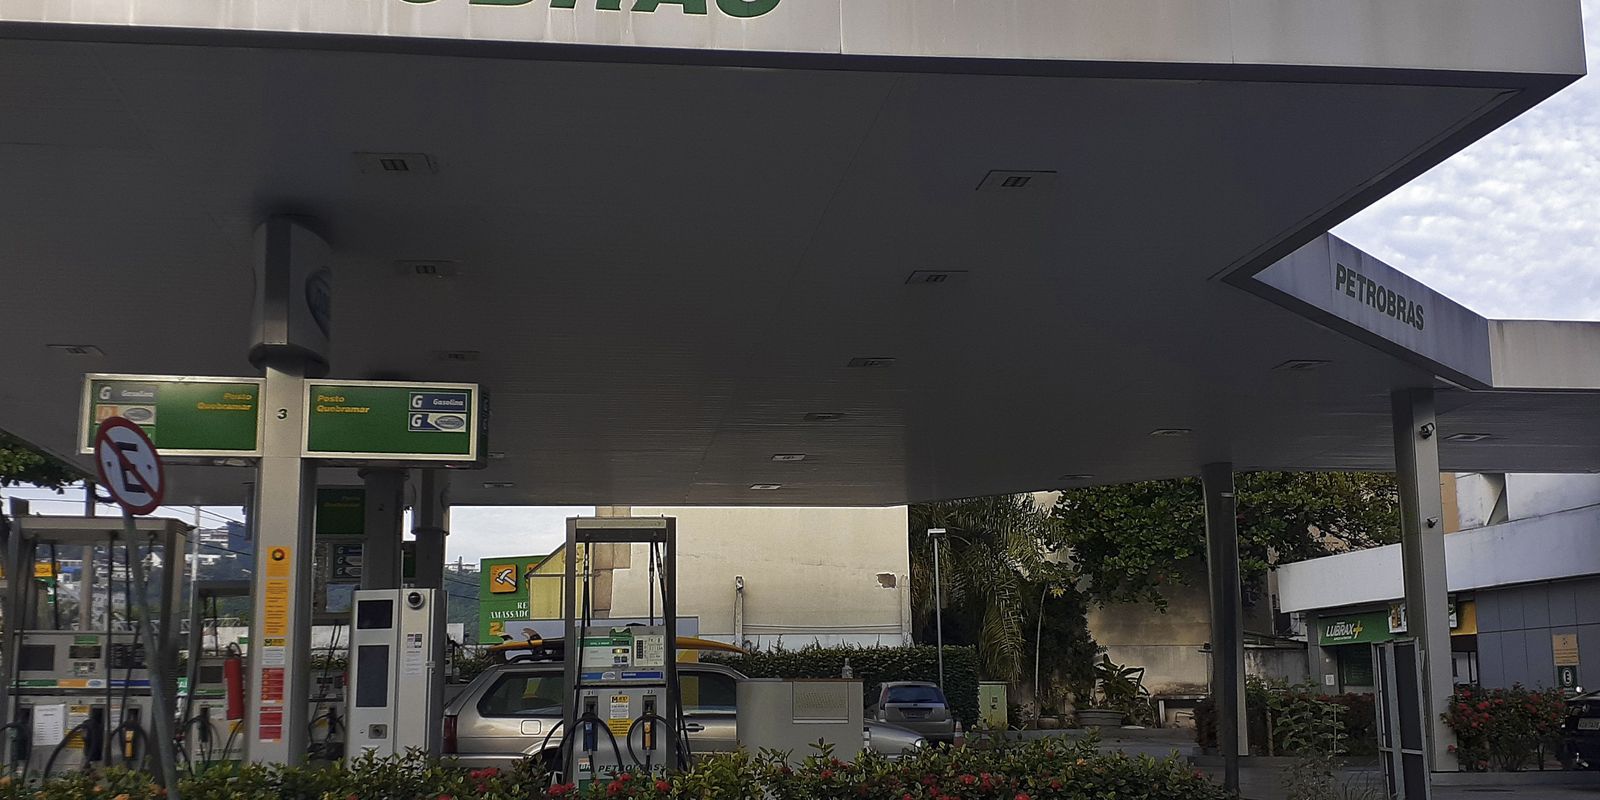 Rio de Janeiro reduces ICMS tax rate on fuel to 18%